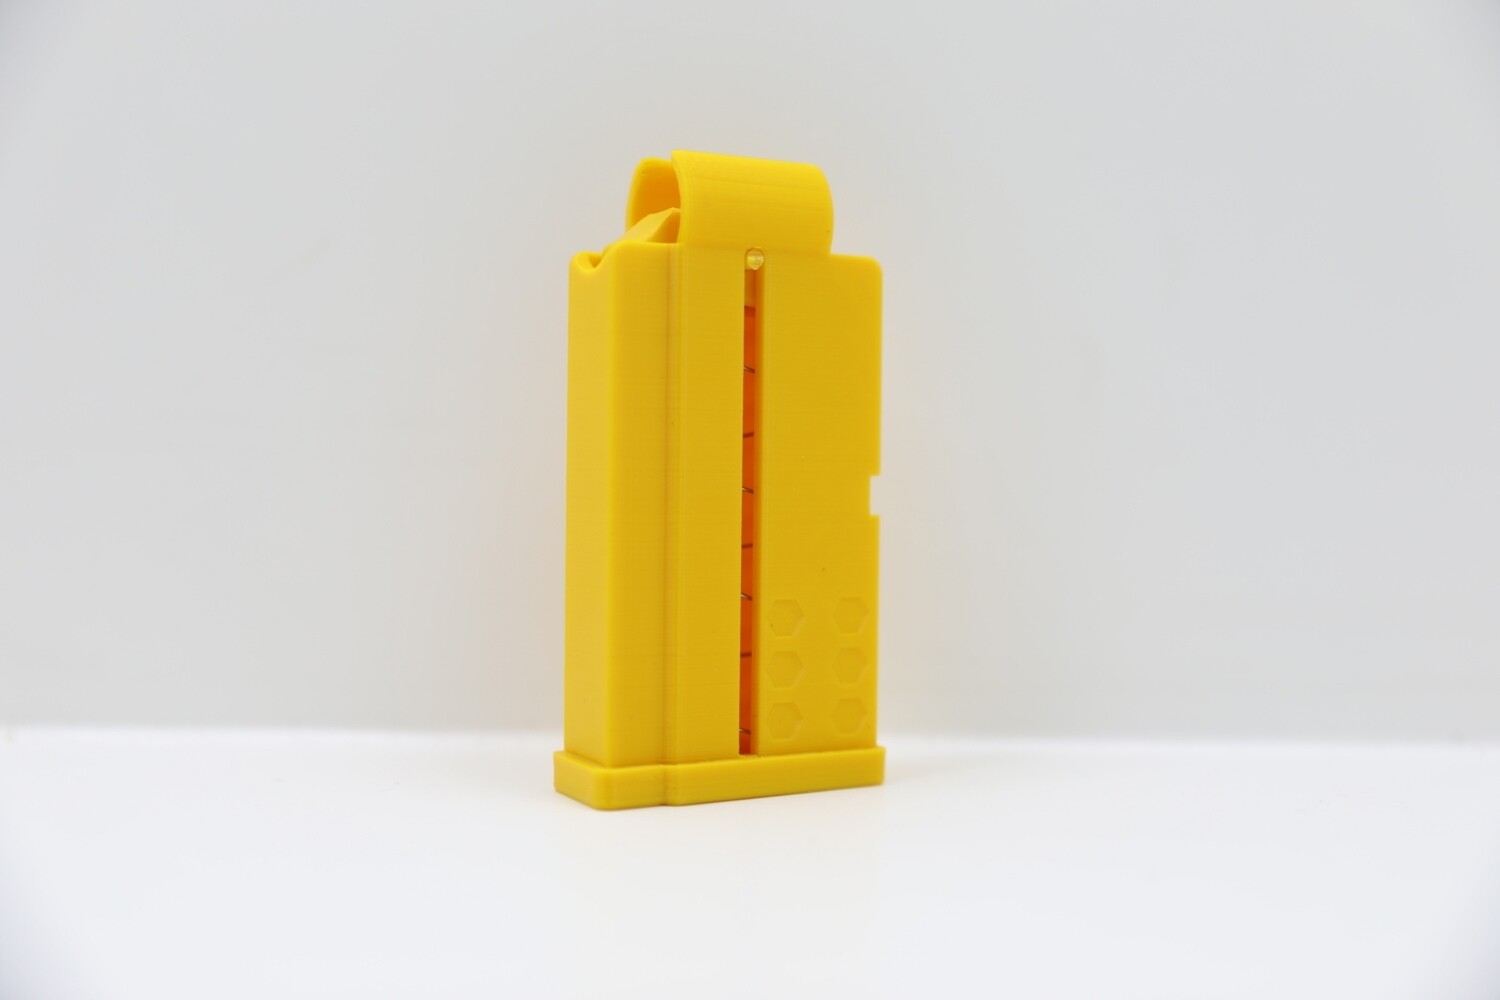 10 round TALON compatible mag; ideal for mag in handle